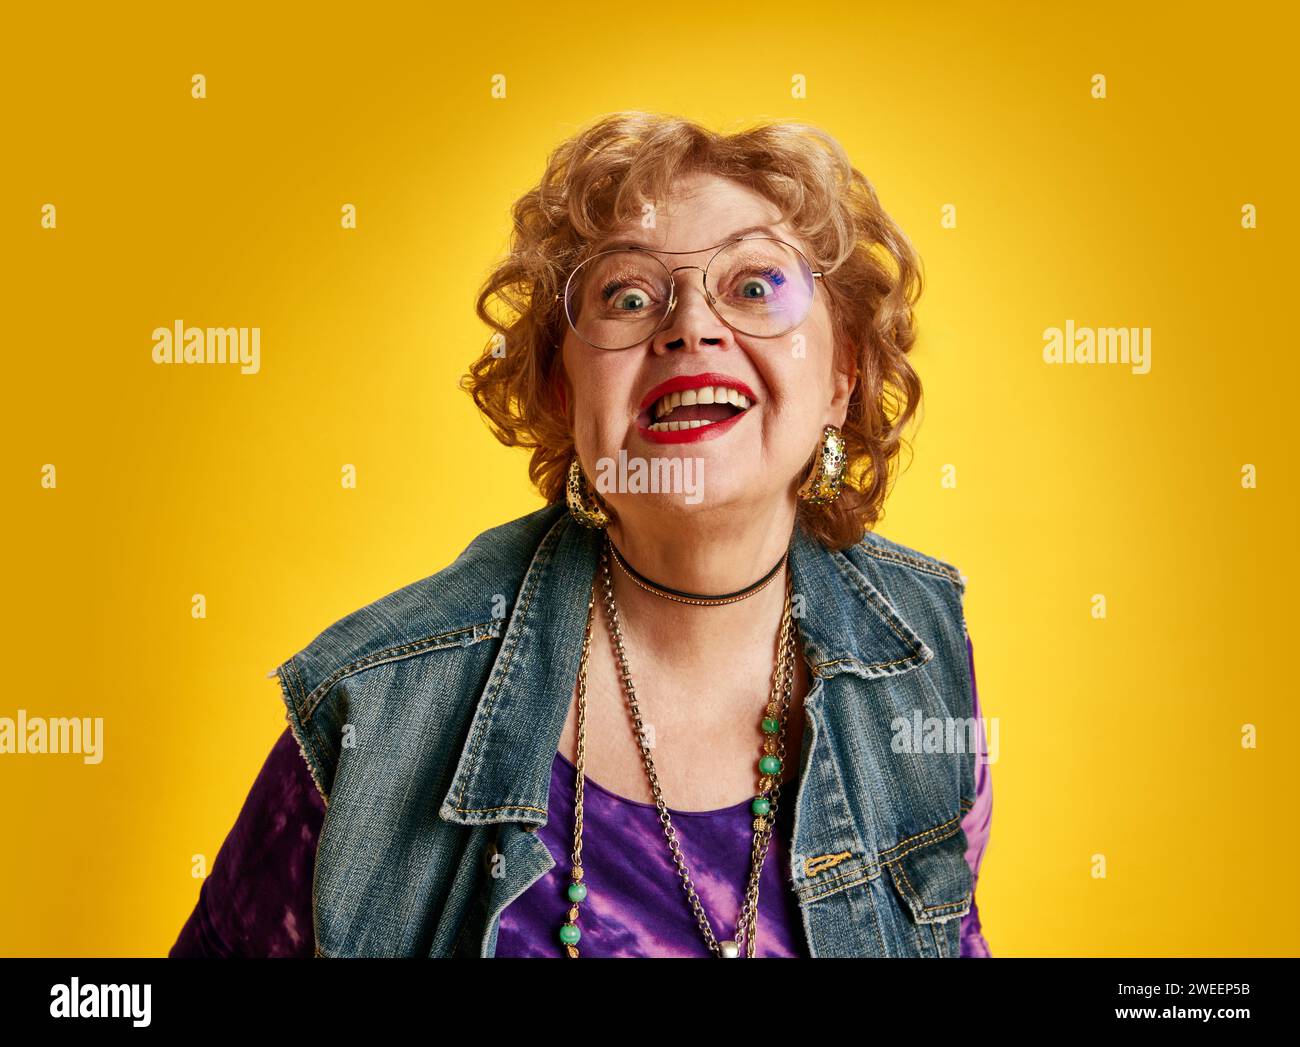 Vibrant smiles at any age. Excited senior lady, wide-eyed in round spectacles dressed denim jacket looking at camera against yellow background. Stock Photo